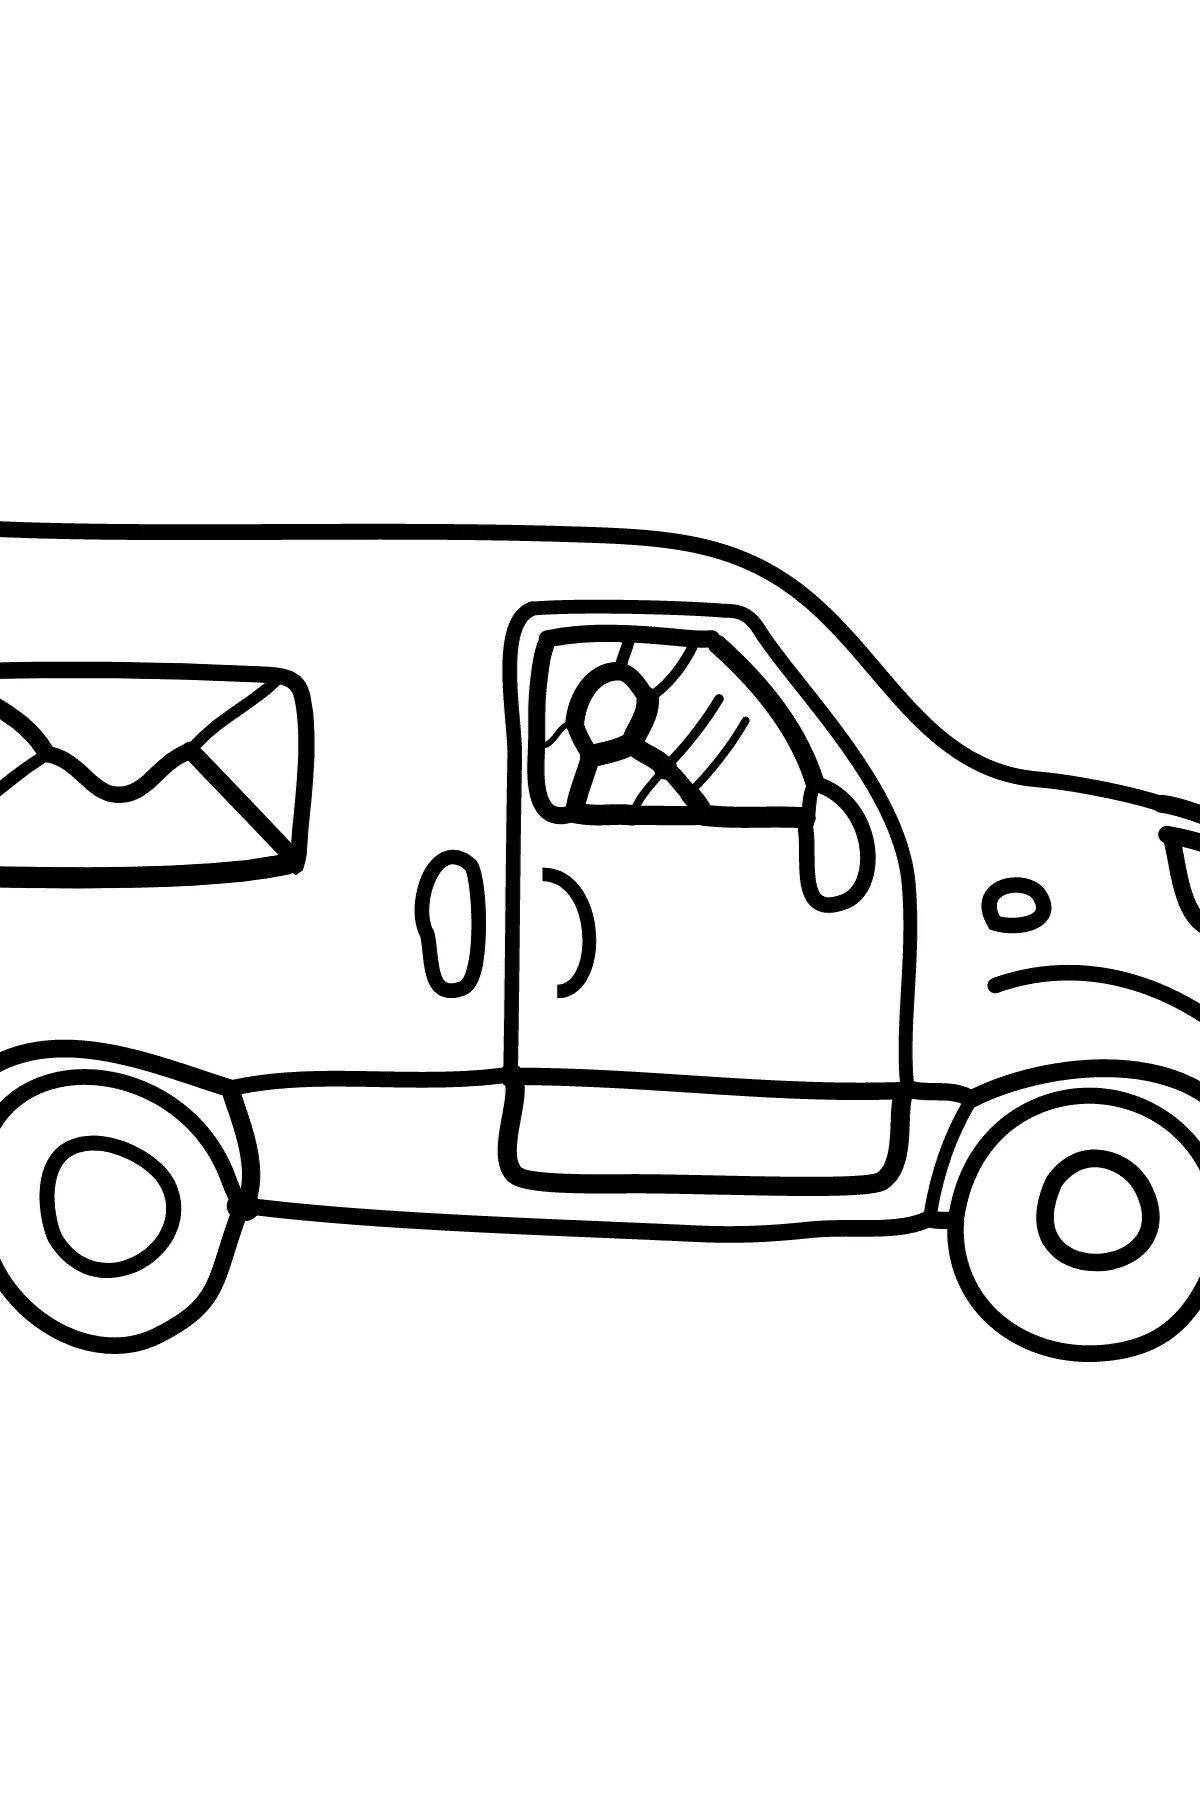 Fancy mail car coloring page